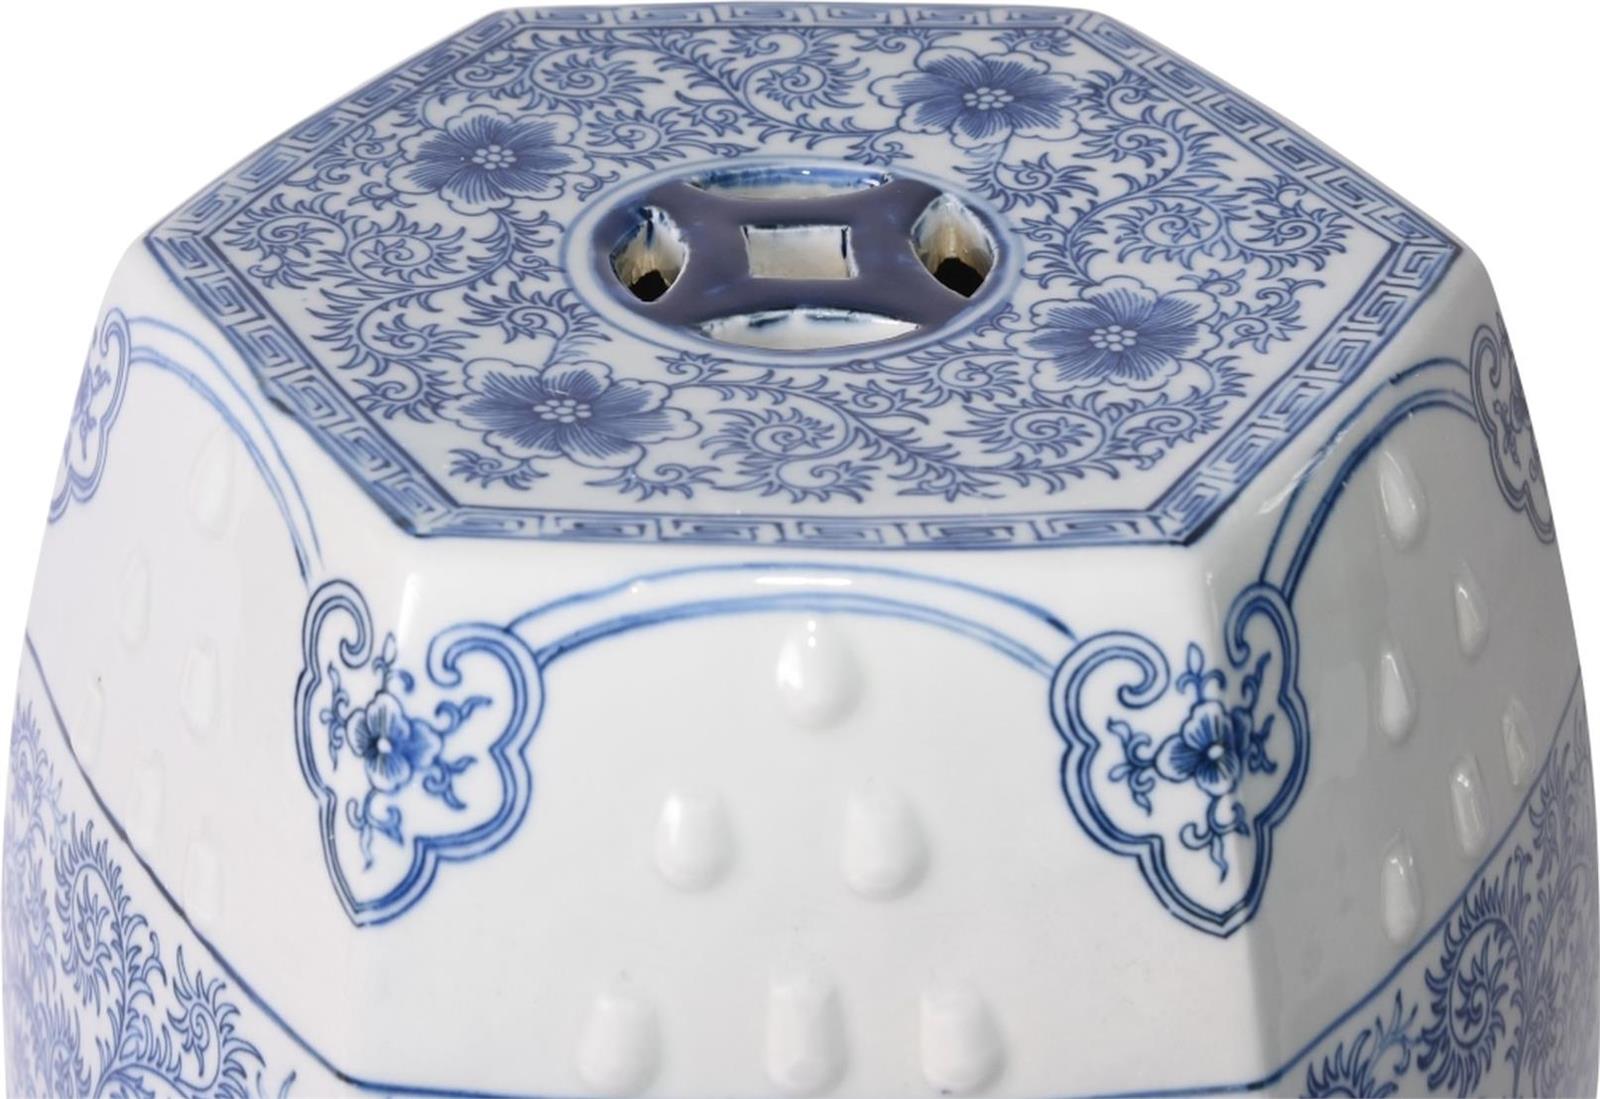 Stool Lotus Flower Backless Hexagonal Blue White Colors May Vary Variable-Image 1